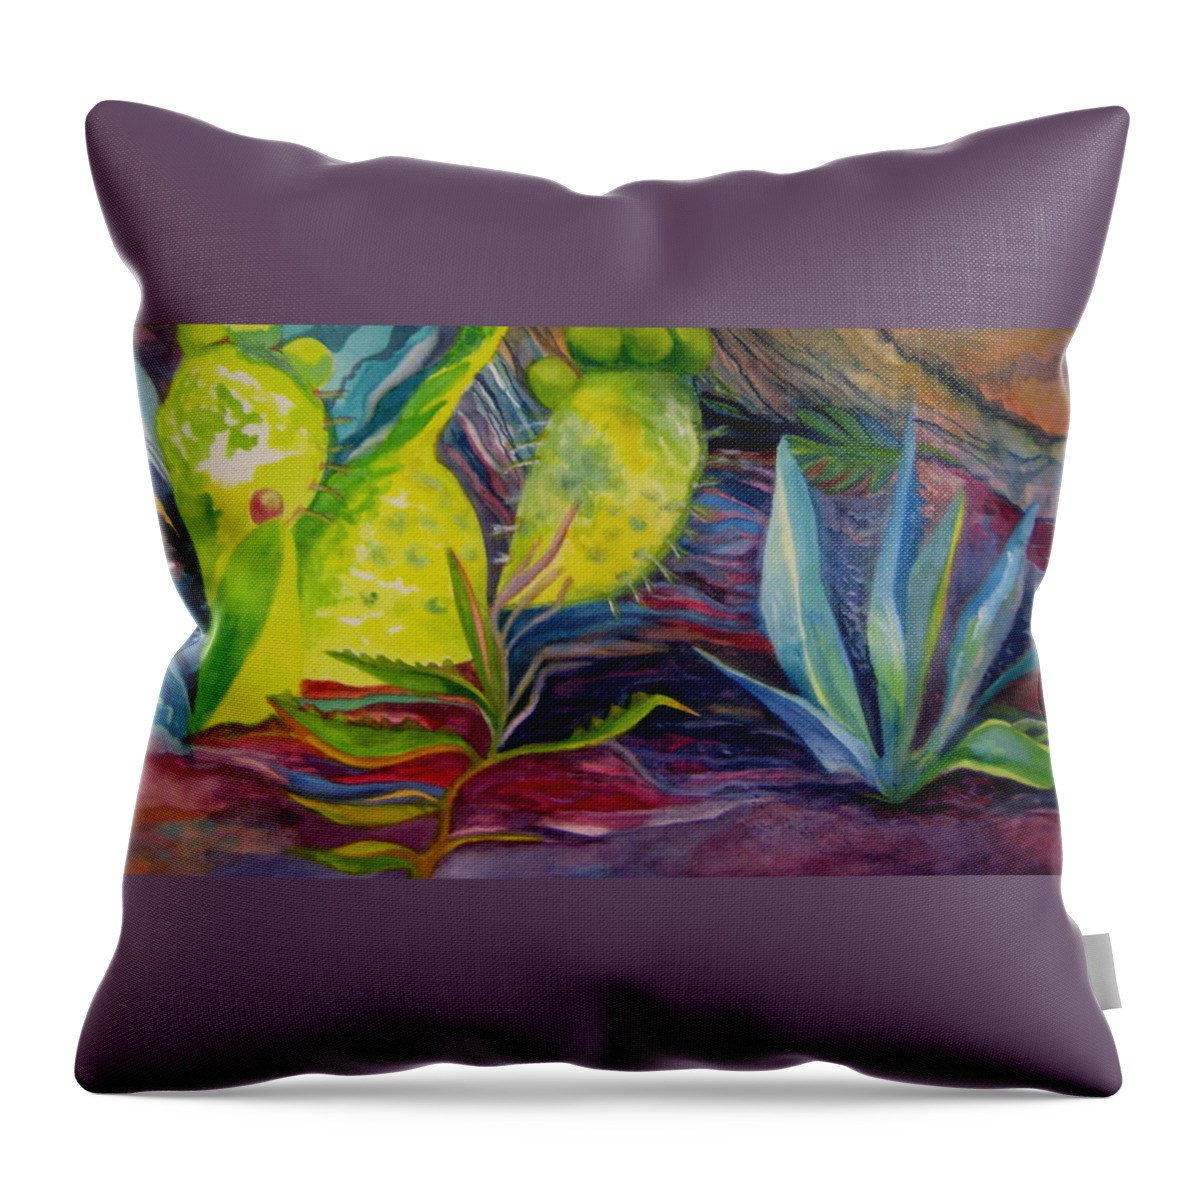  Cinque Terre Throw Pillow featuring the painting Via Dell Amore by Kandy Cross